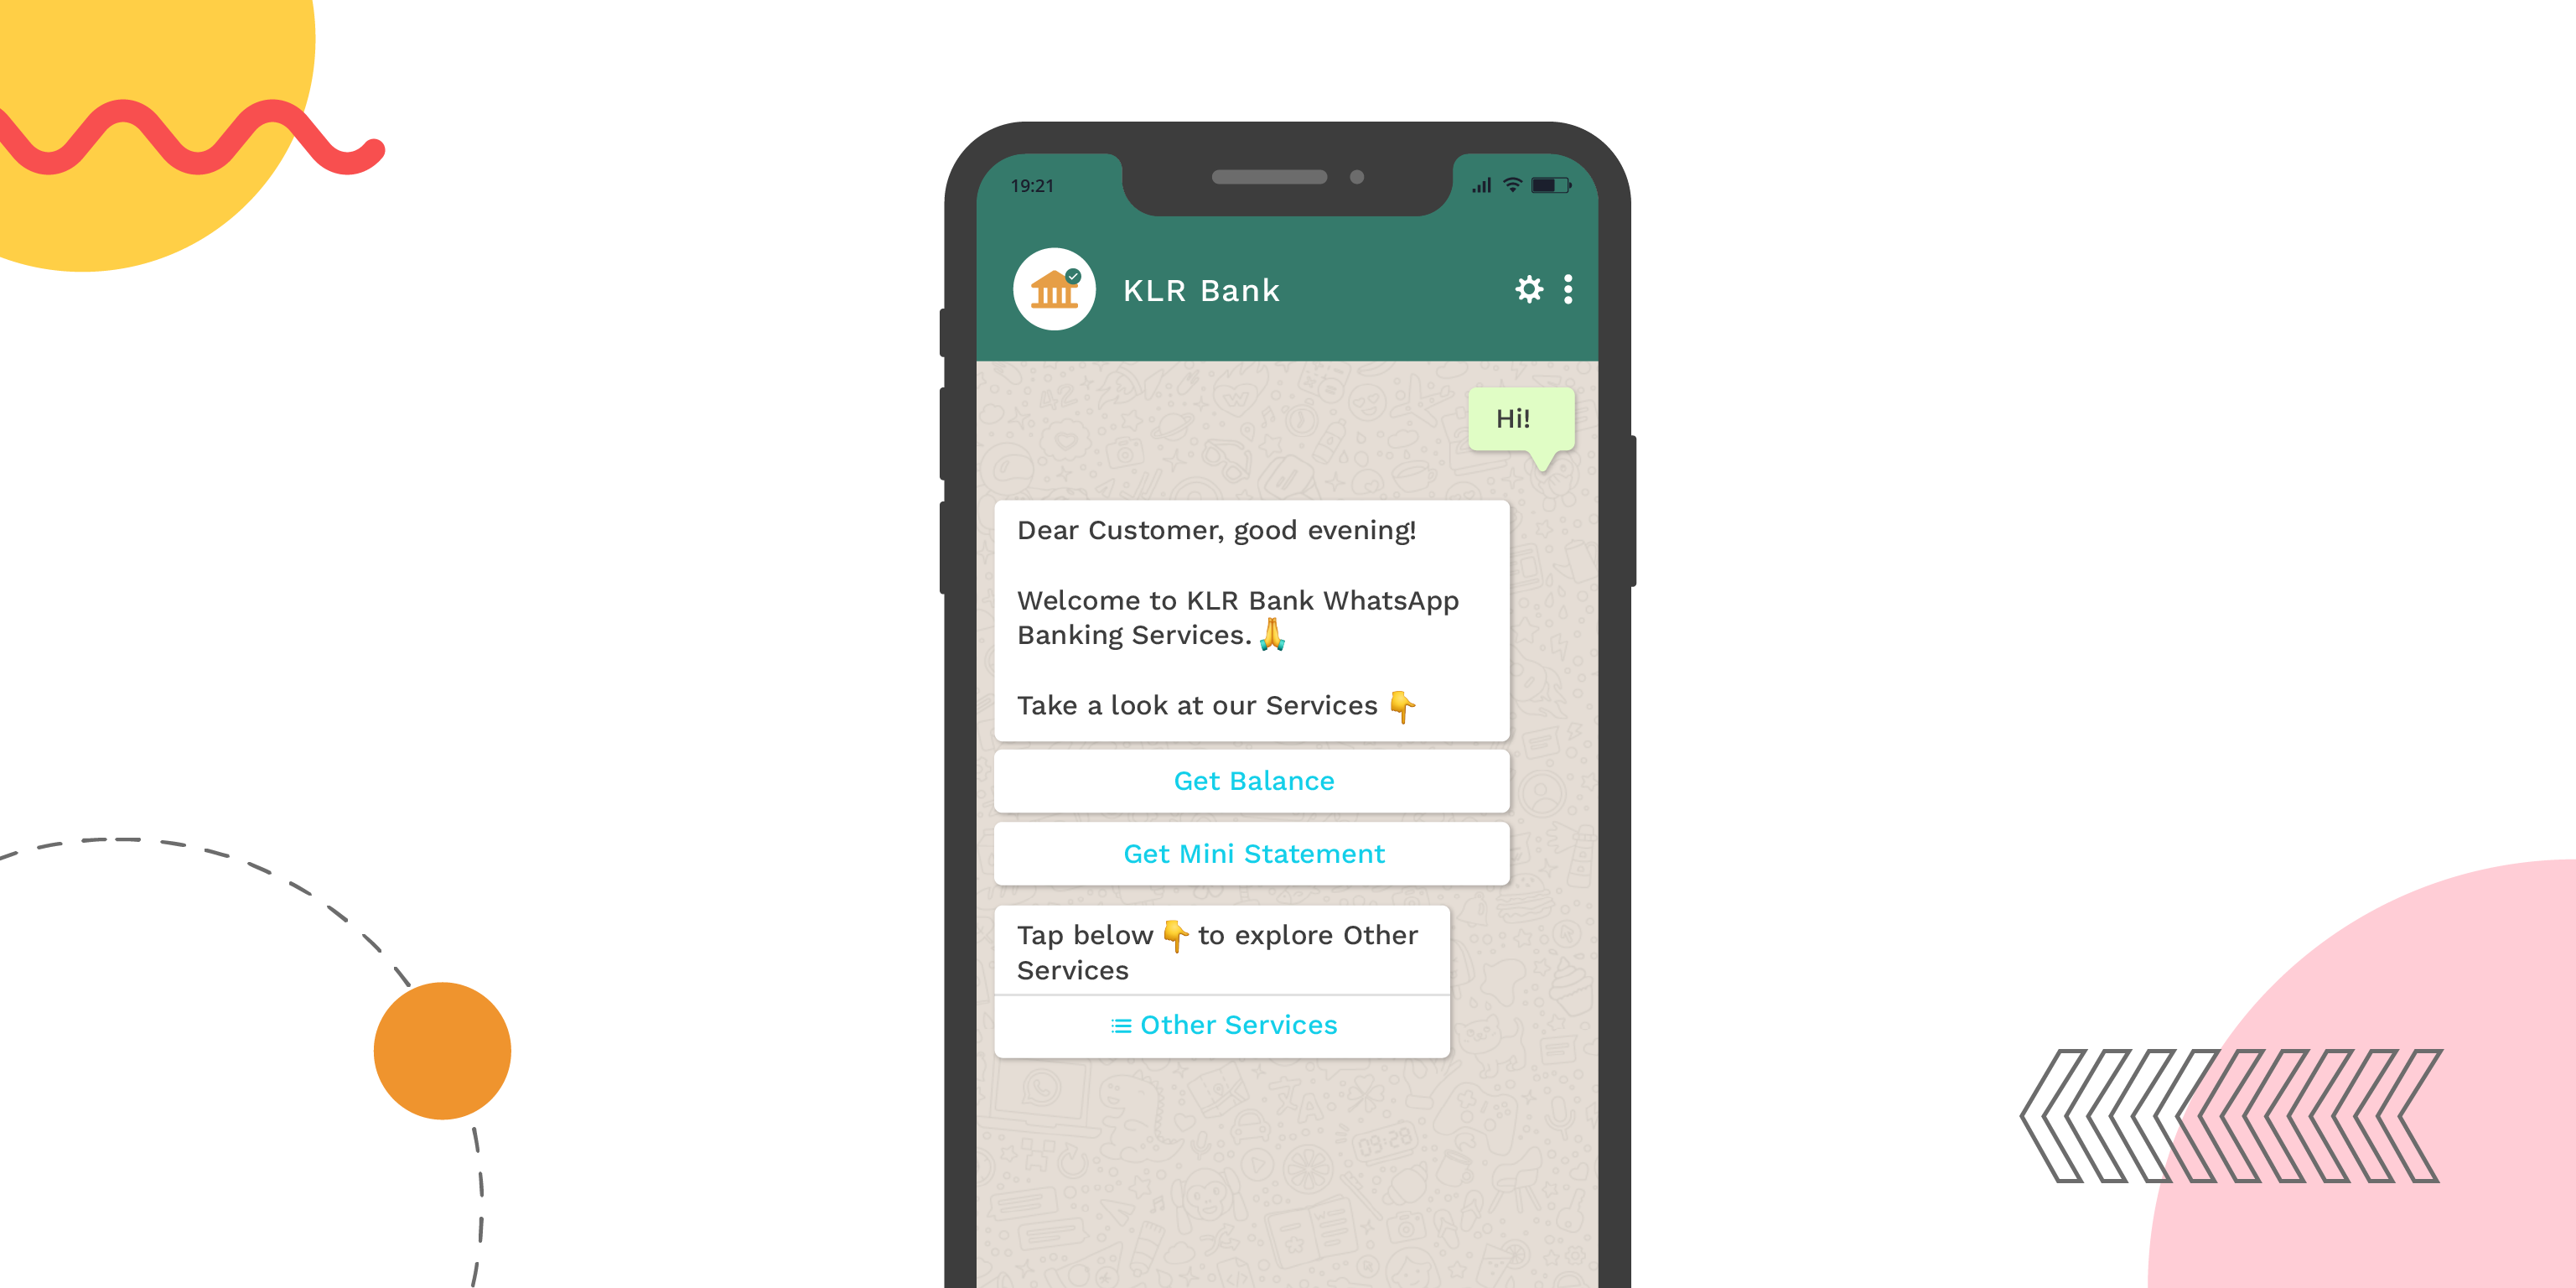 Whatsapp for banking and financial services